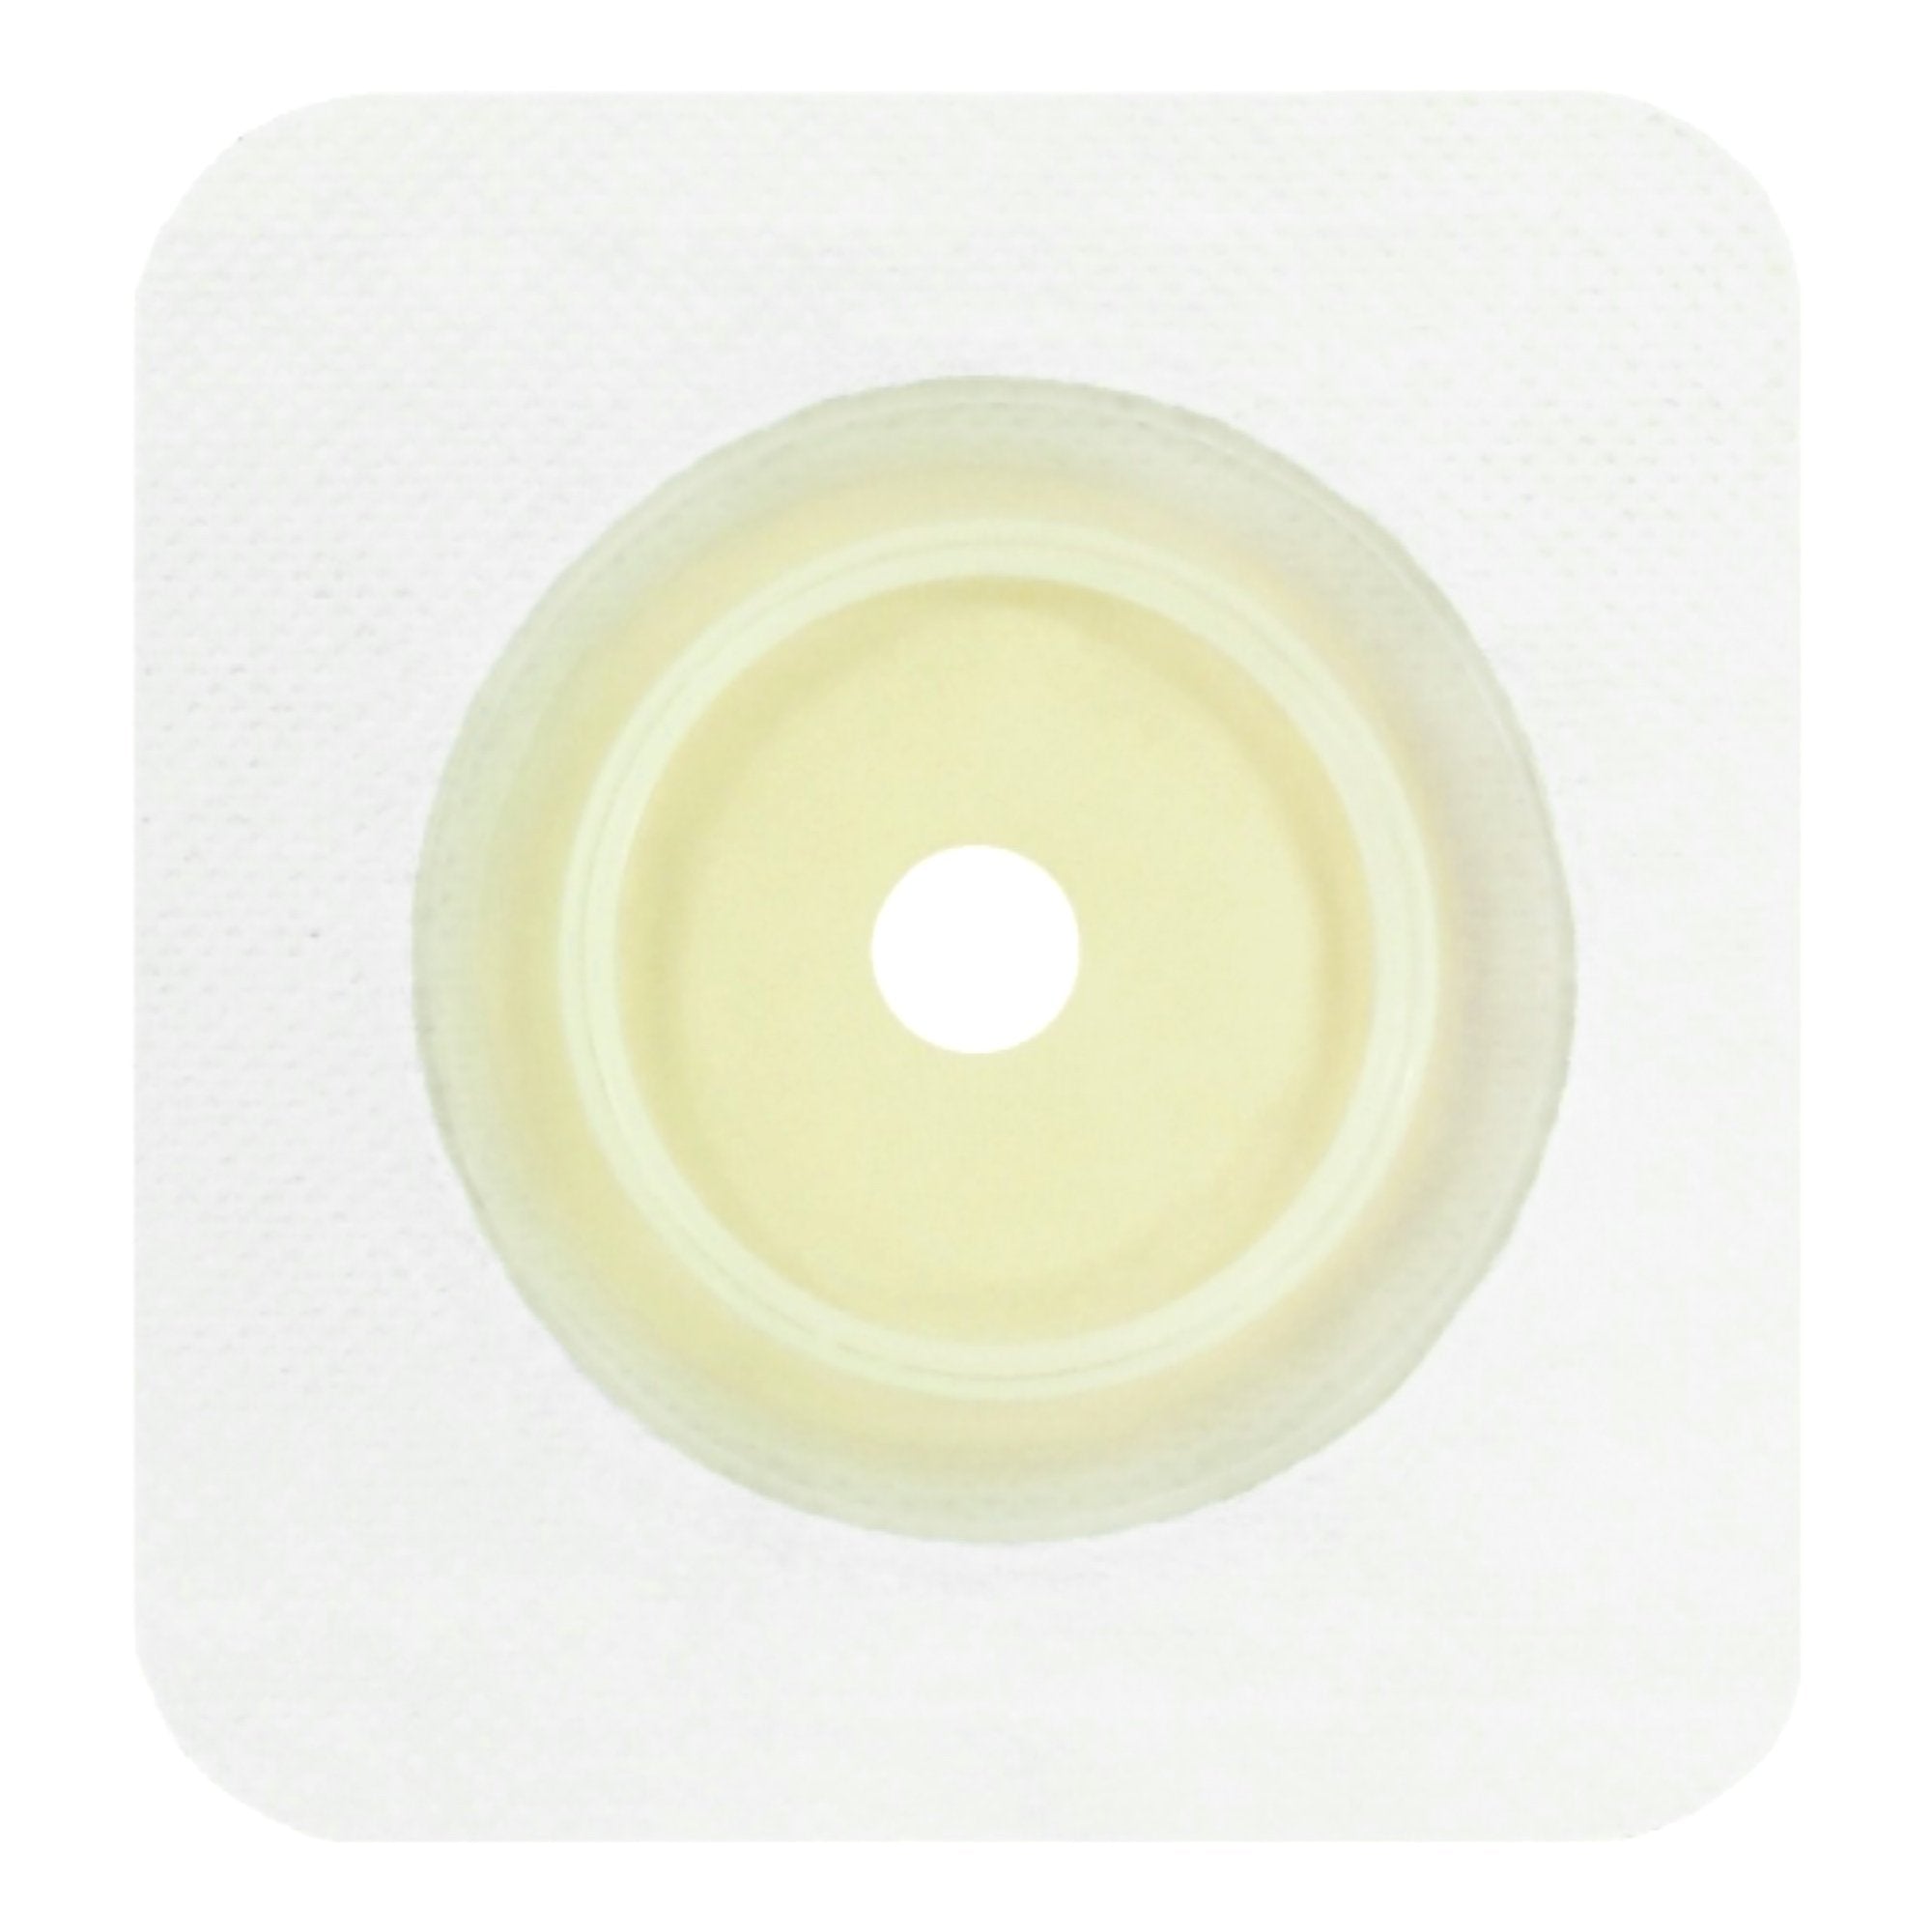 Ostomy Barrier Securi-T® Trim to Fit, Standard Wear Flexible Tape 45 mm Flange Up to 1-1/4 Inch Opening 4-1/2 X 4-1/2 Inch